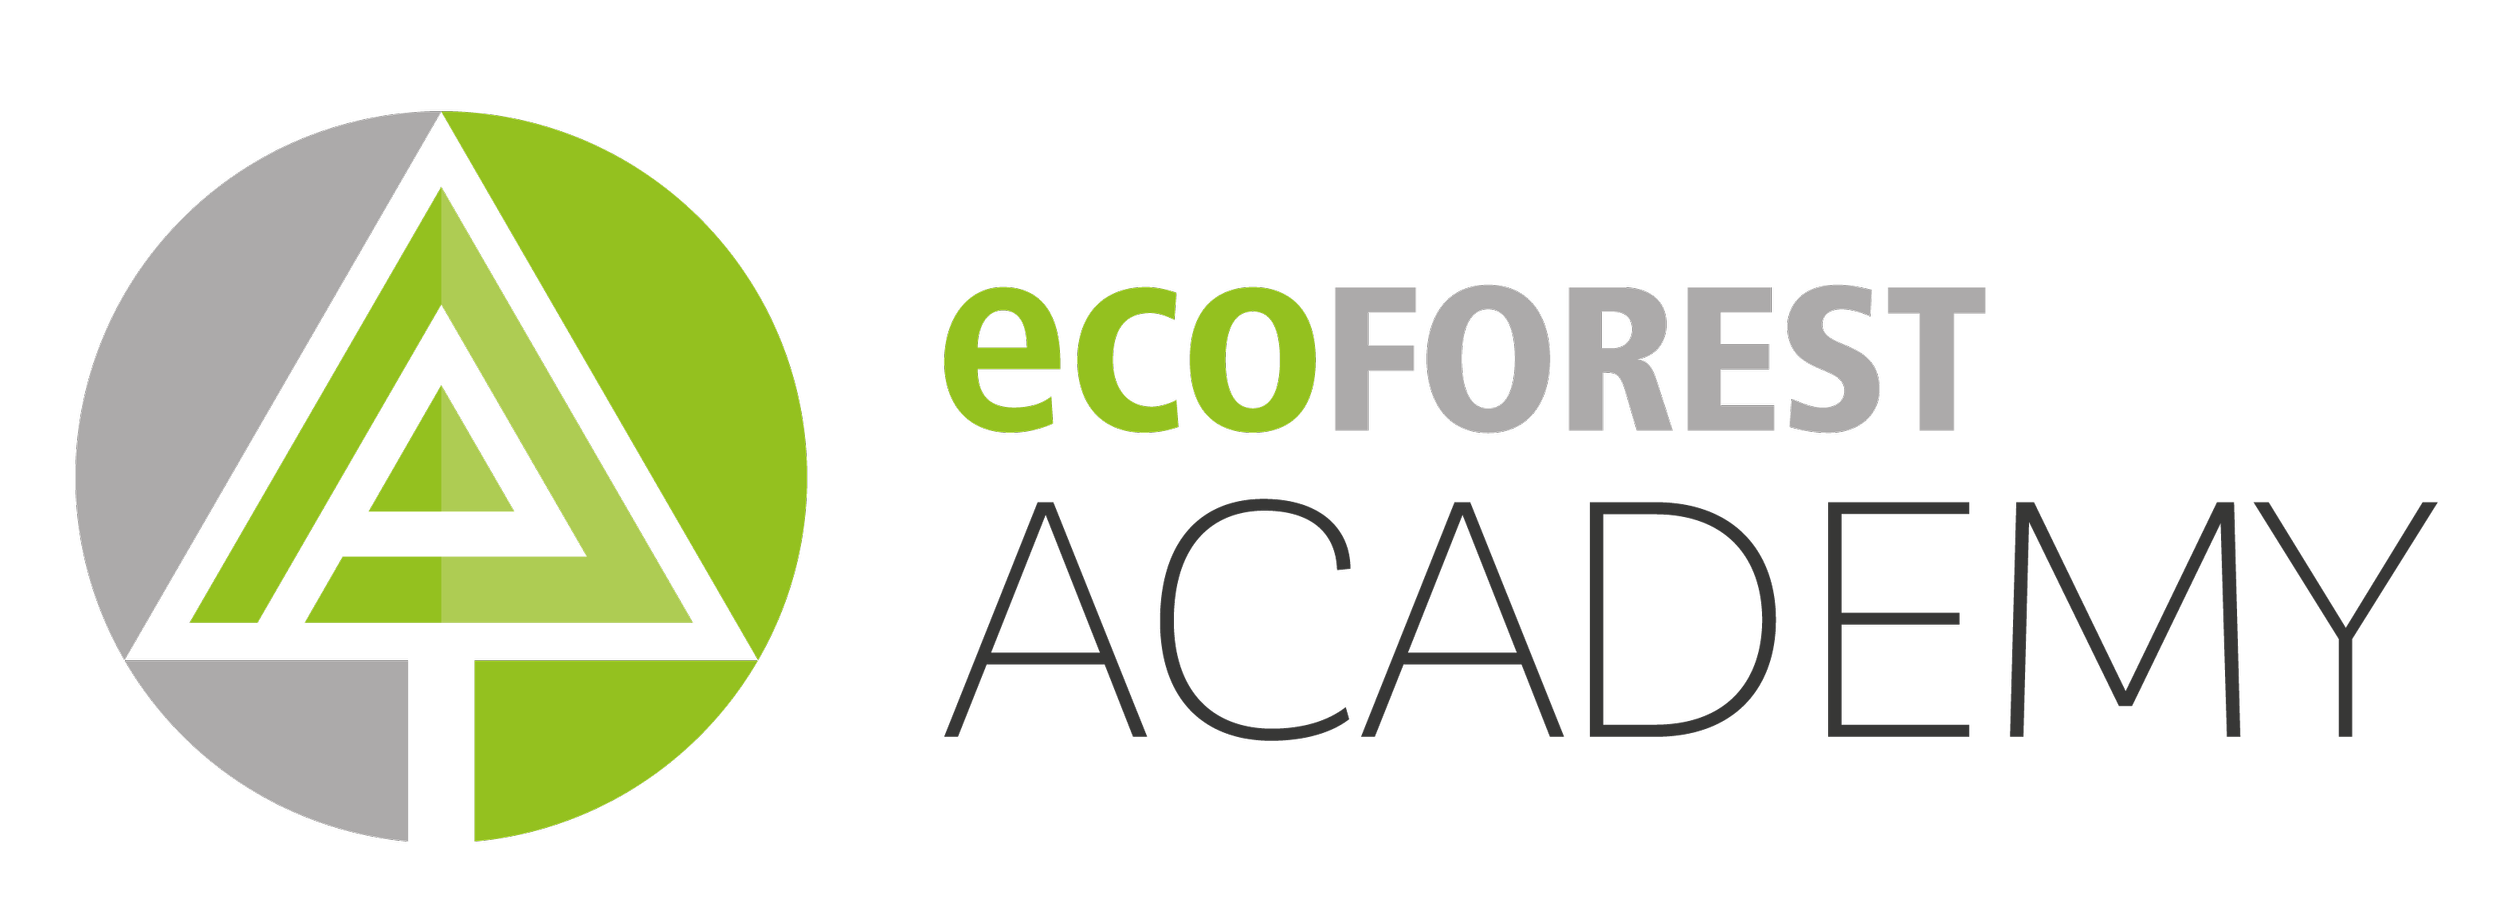 Logo_ecoforest_academy_HQ-01.png